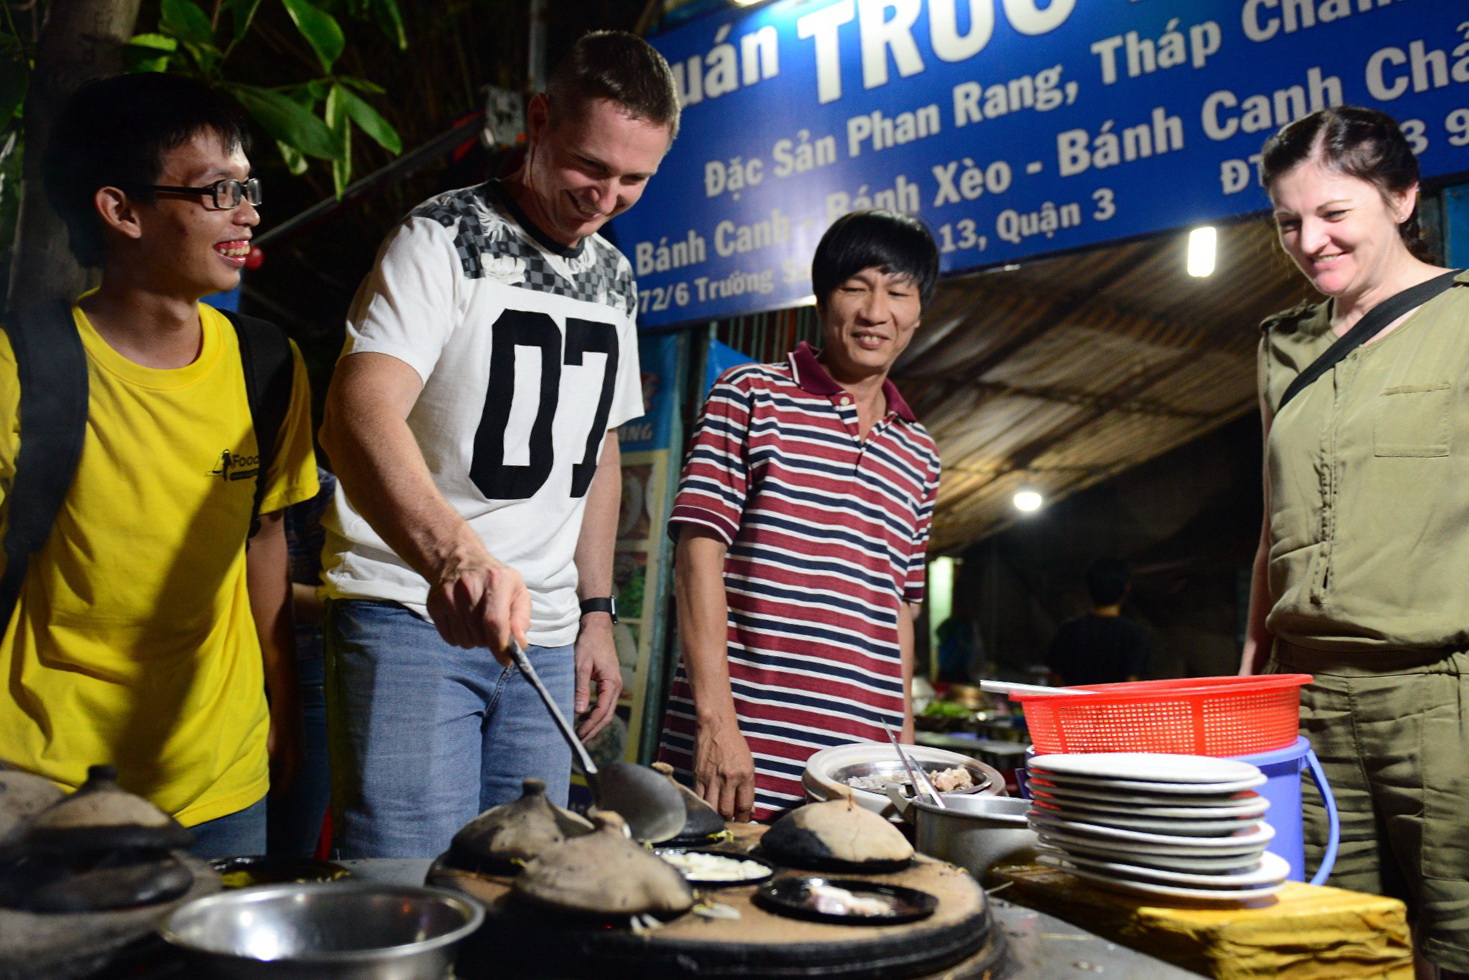 Youths offer authentic food tours around Ho Chi Minh City